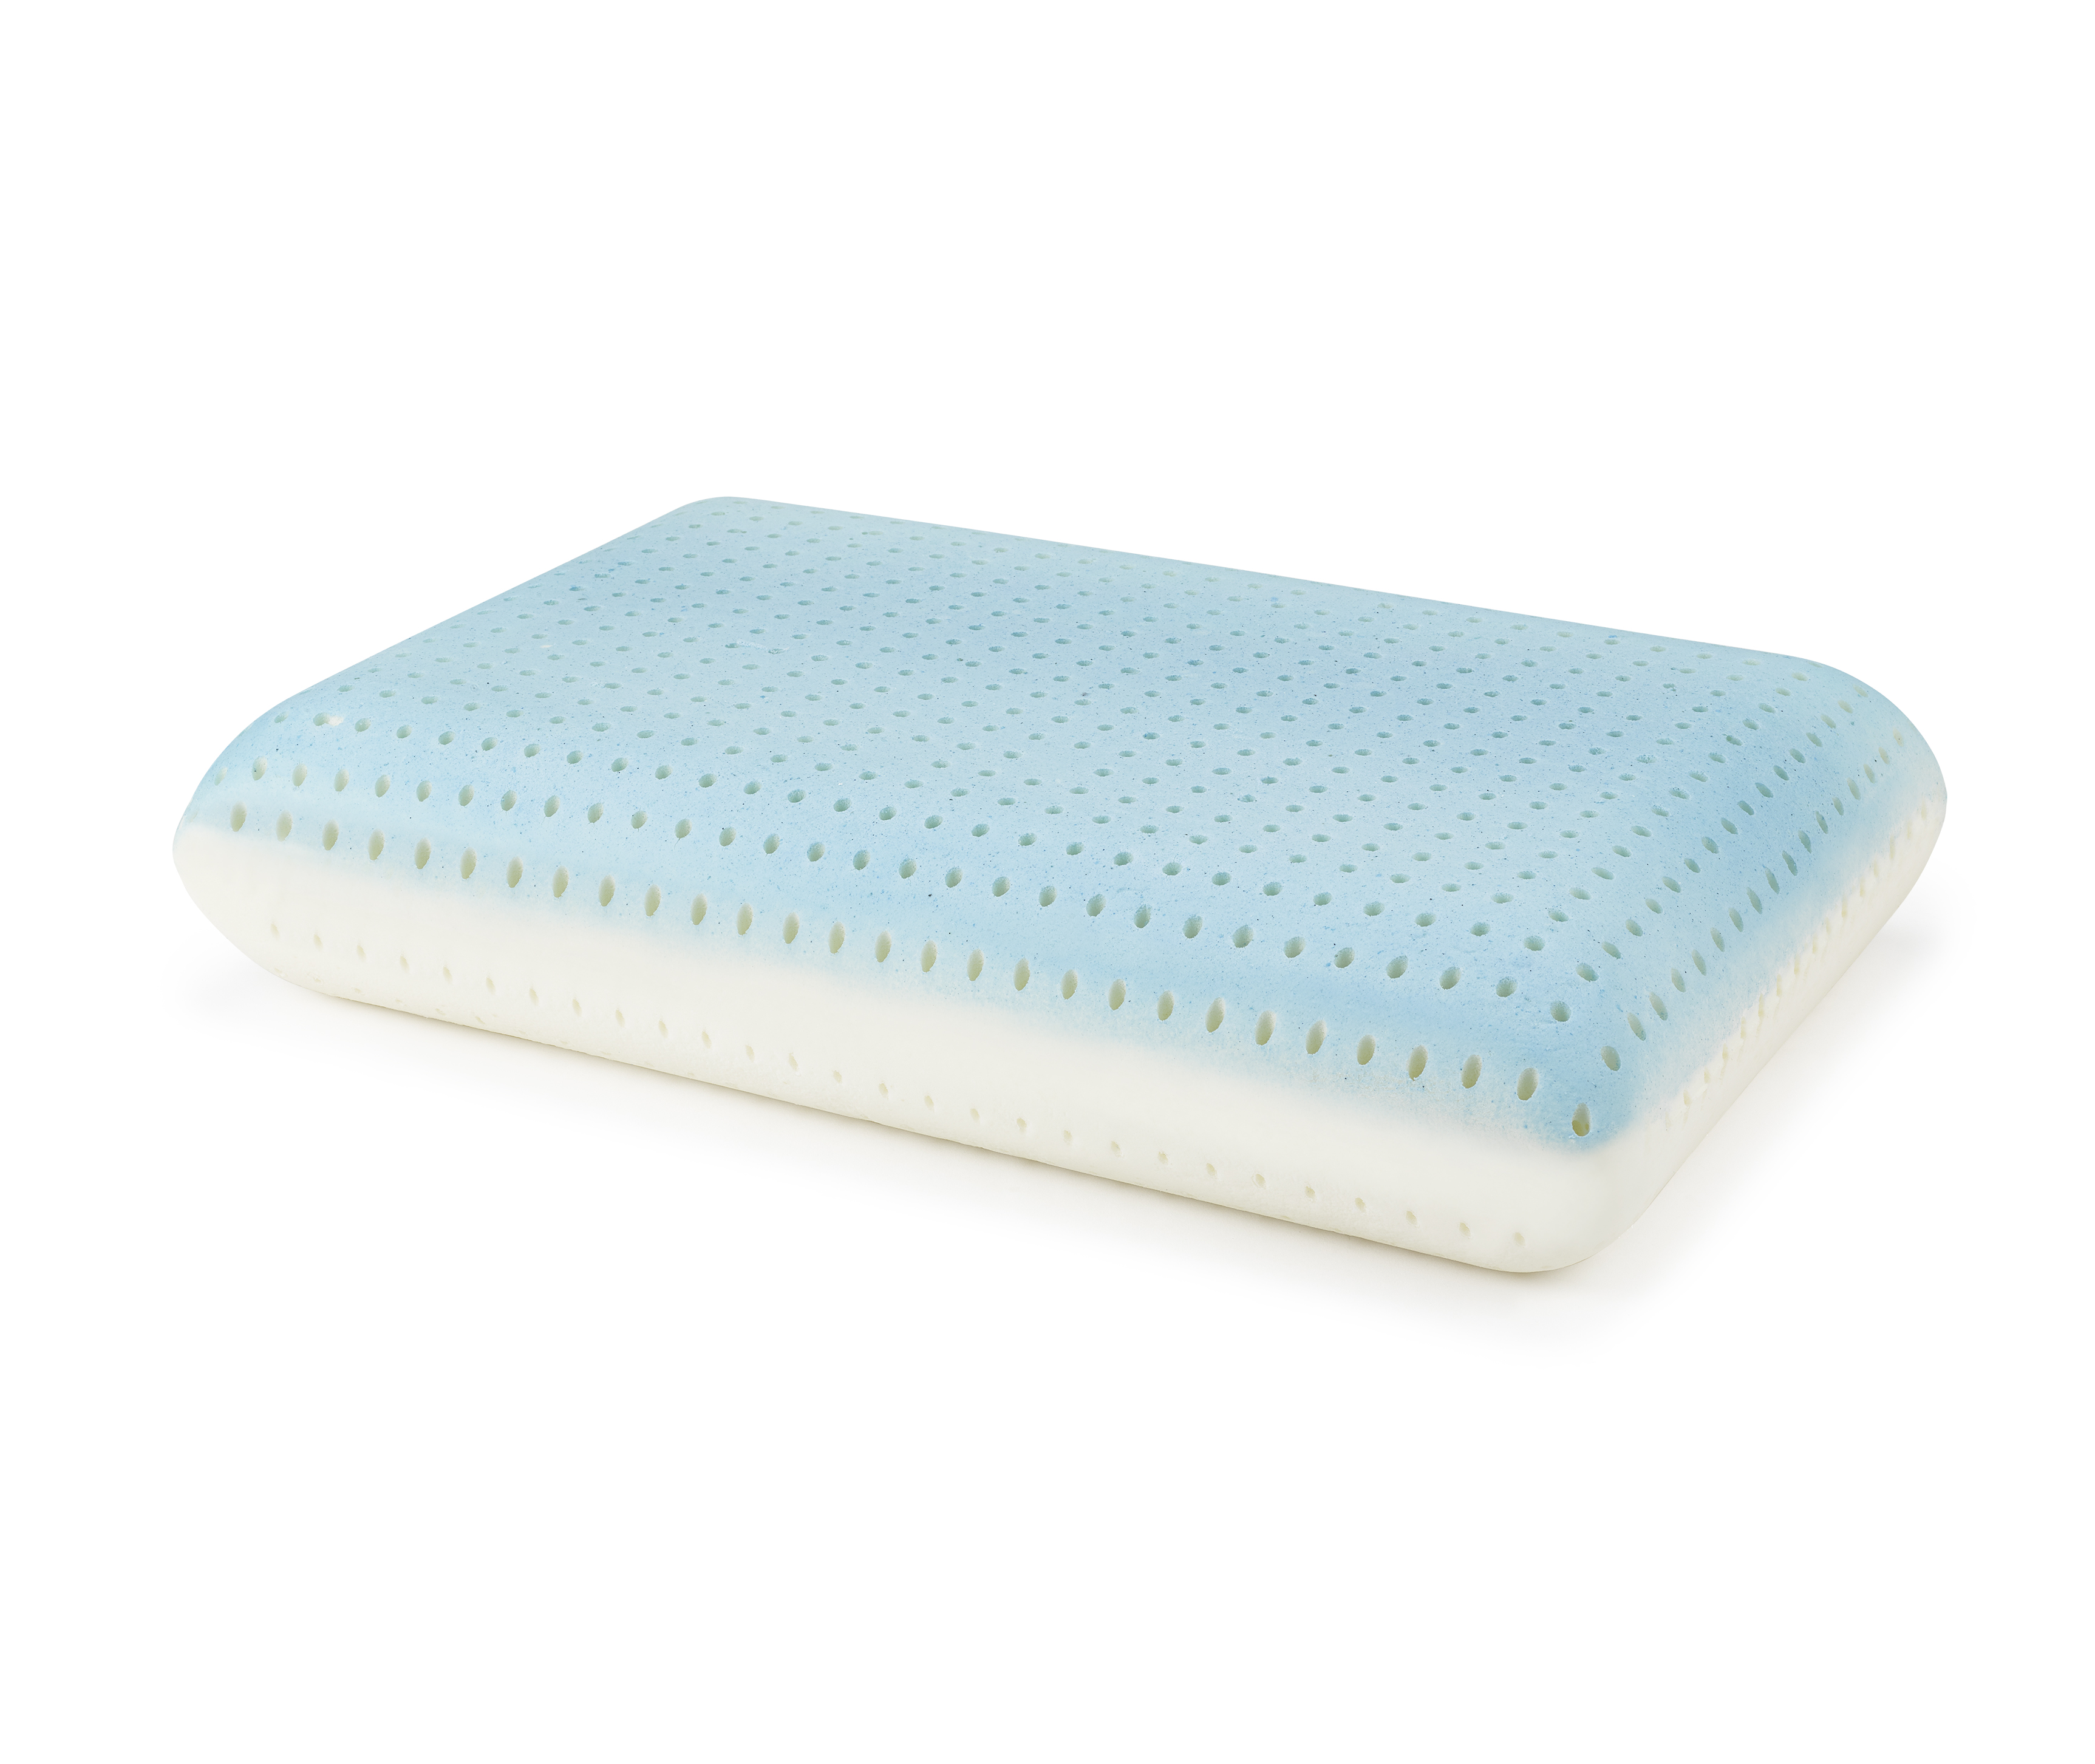 Beautyrest Silver Aquacool Memory Foam Pillow With Removable Cover, Standard/Queen - image 4 of 11